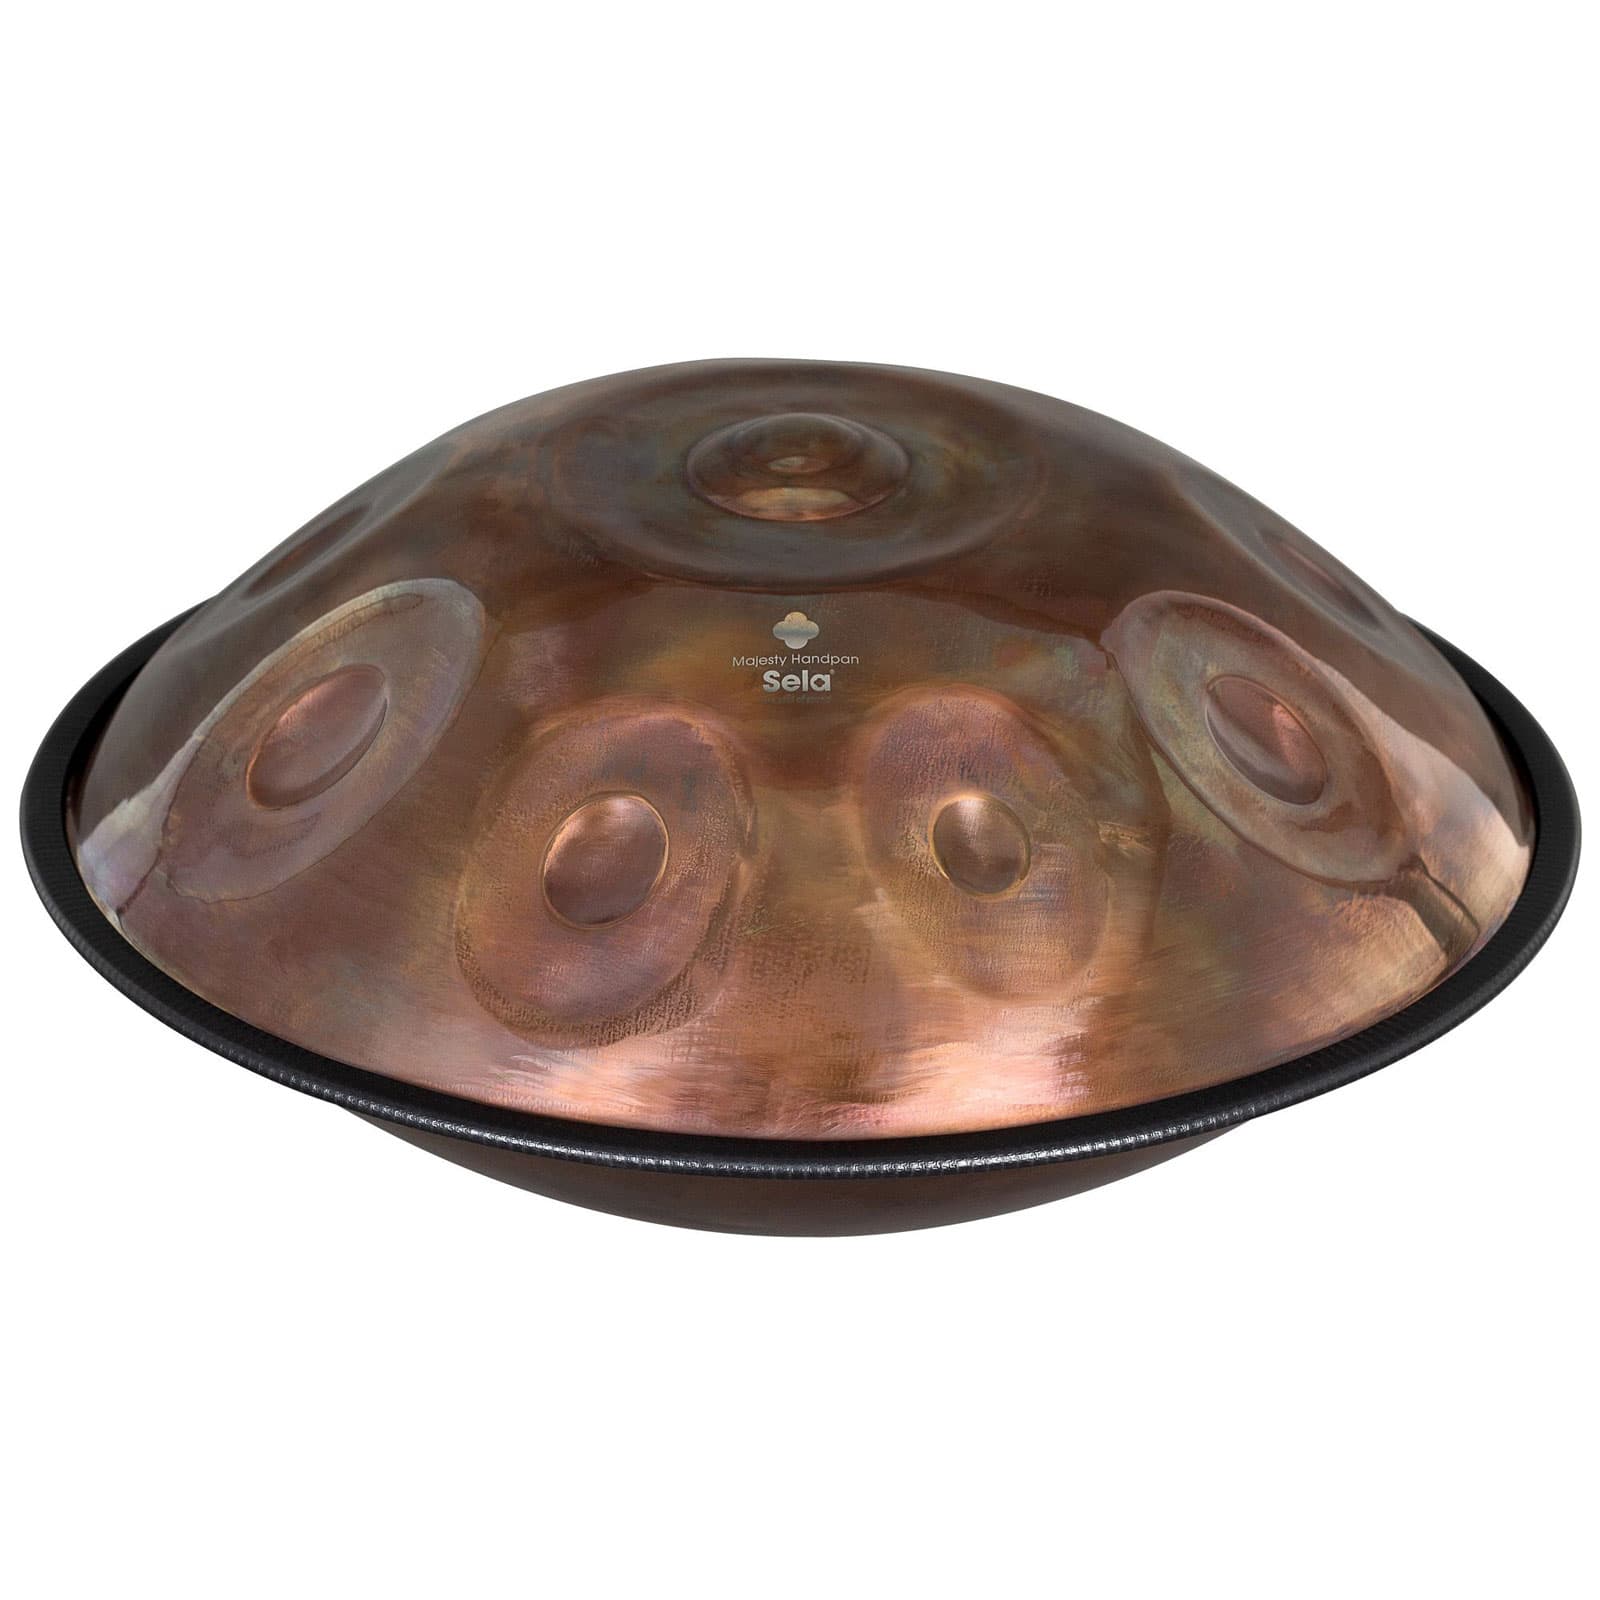 SELA PERCUSSION MAJESTY HANDPAN SI MINOR STAINLESS STEEL SE 217